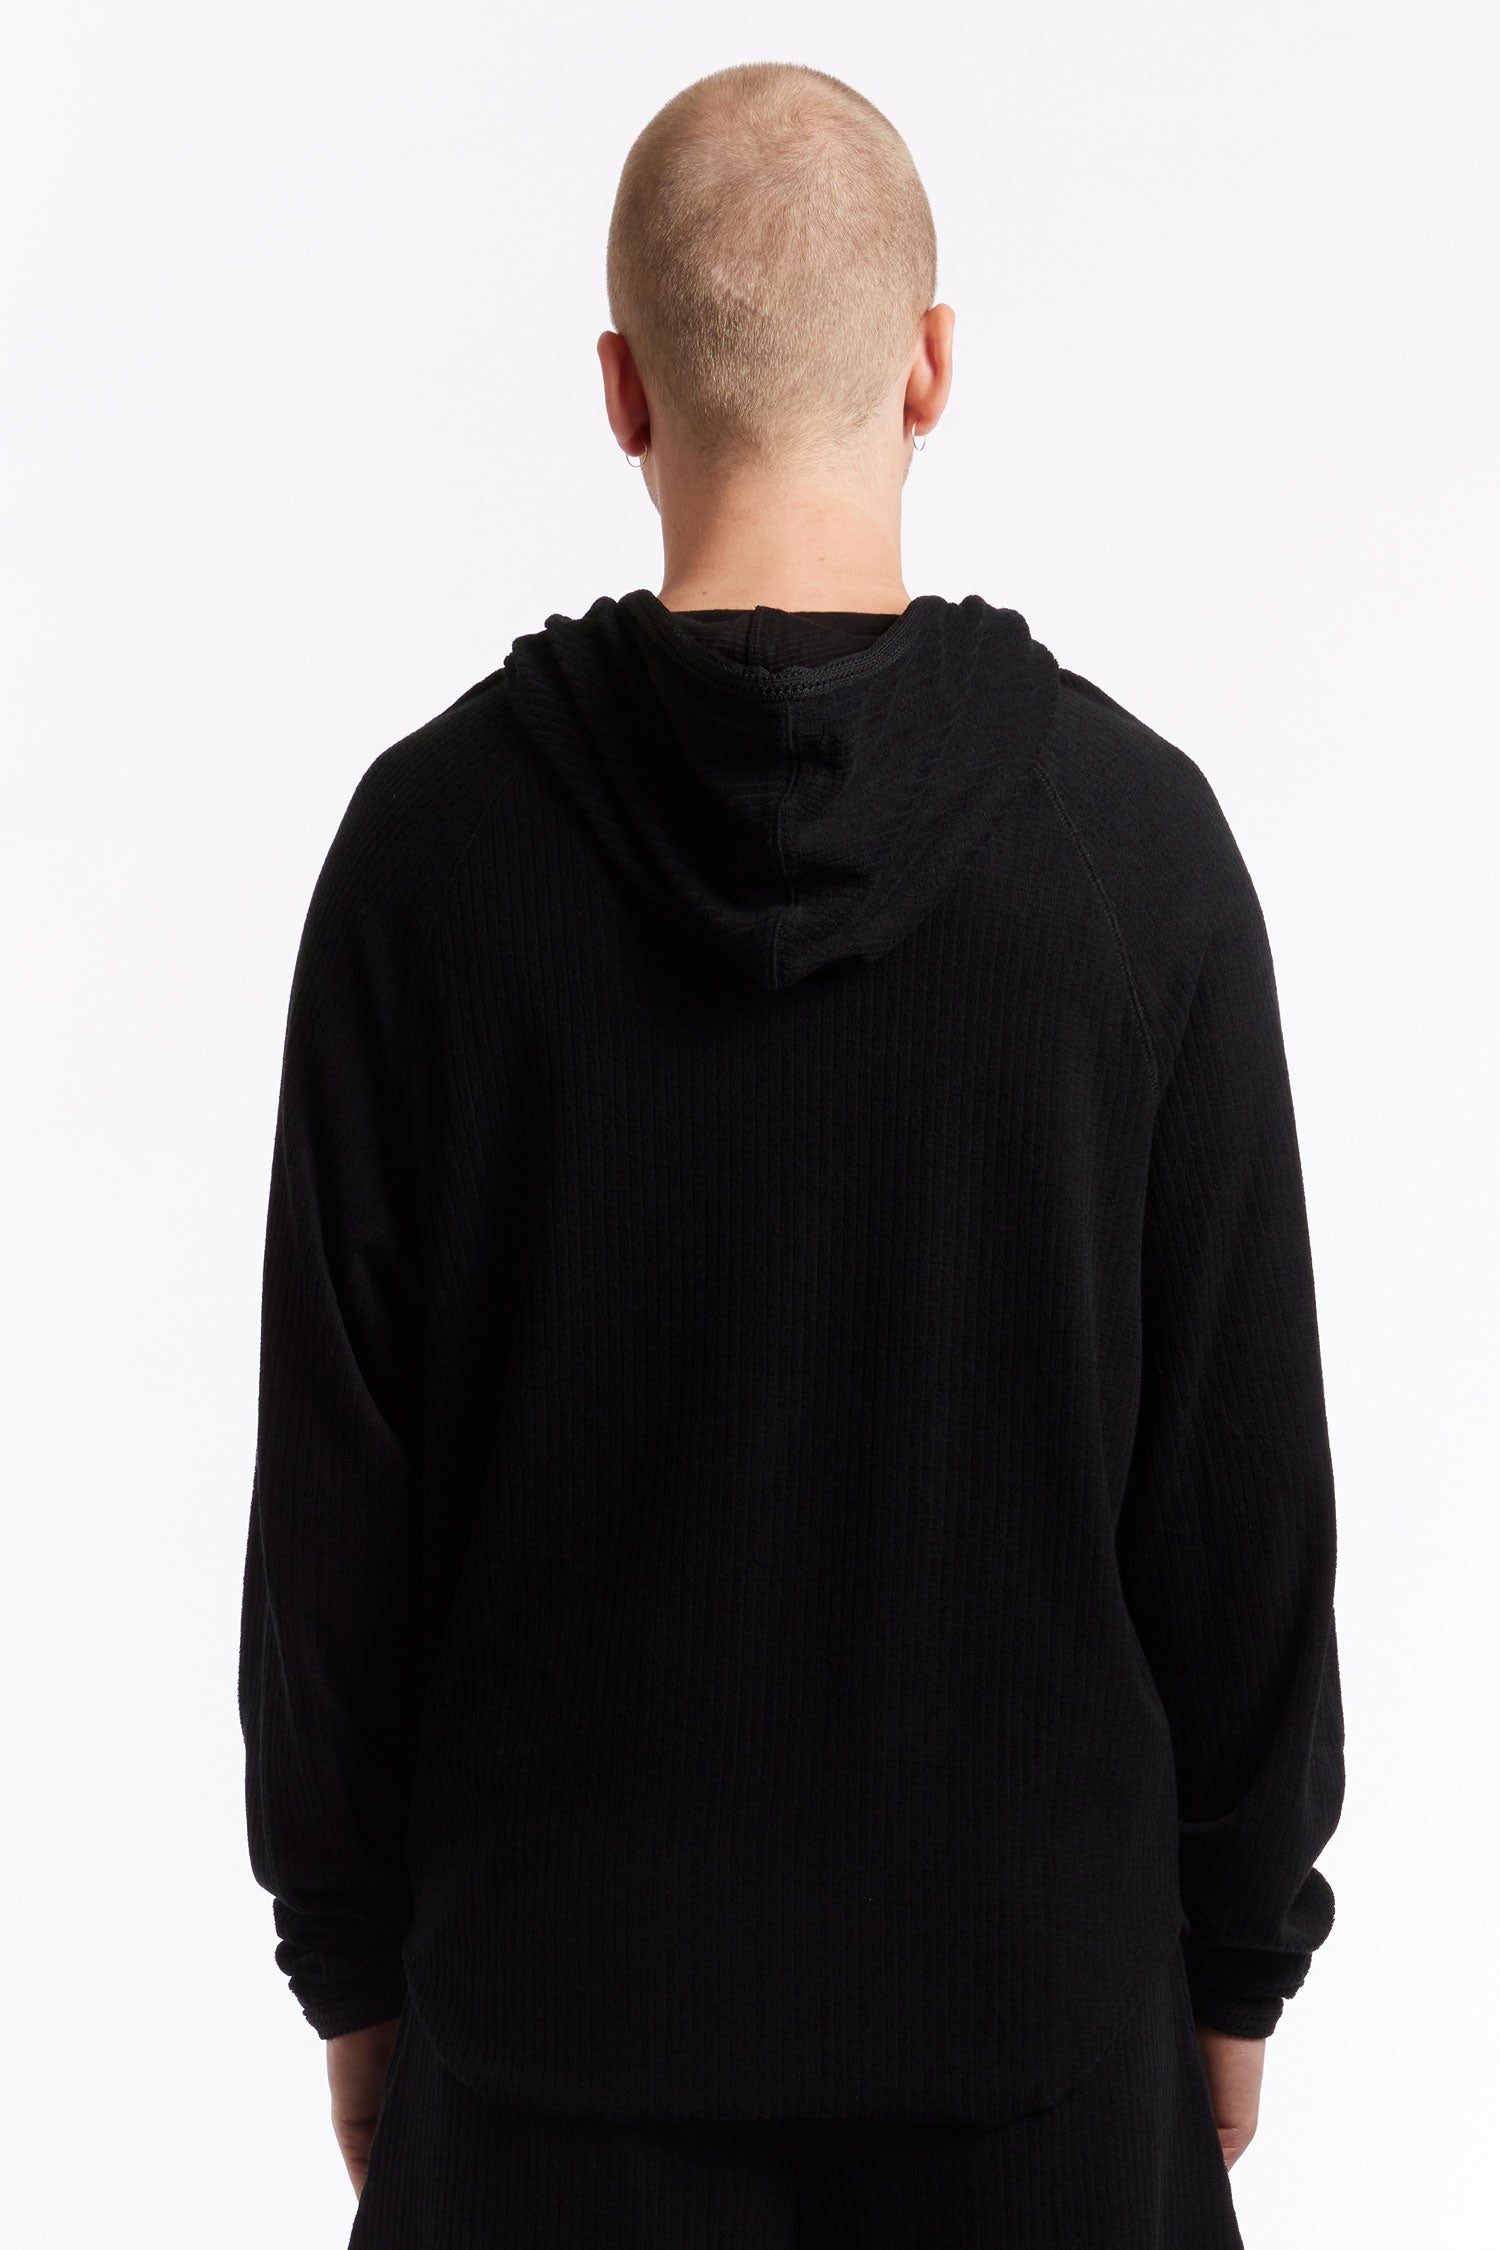 The AFFXWRKS - HOLSTER HOOD  available online with global shipping, and in PAM Stores Melbourne and Sydney.